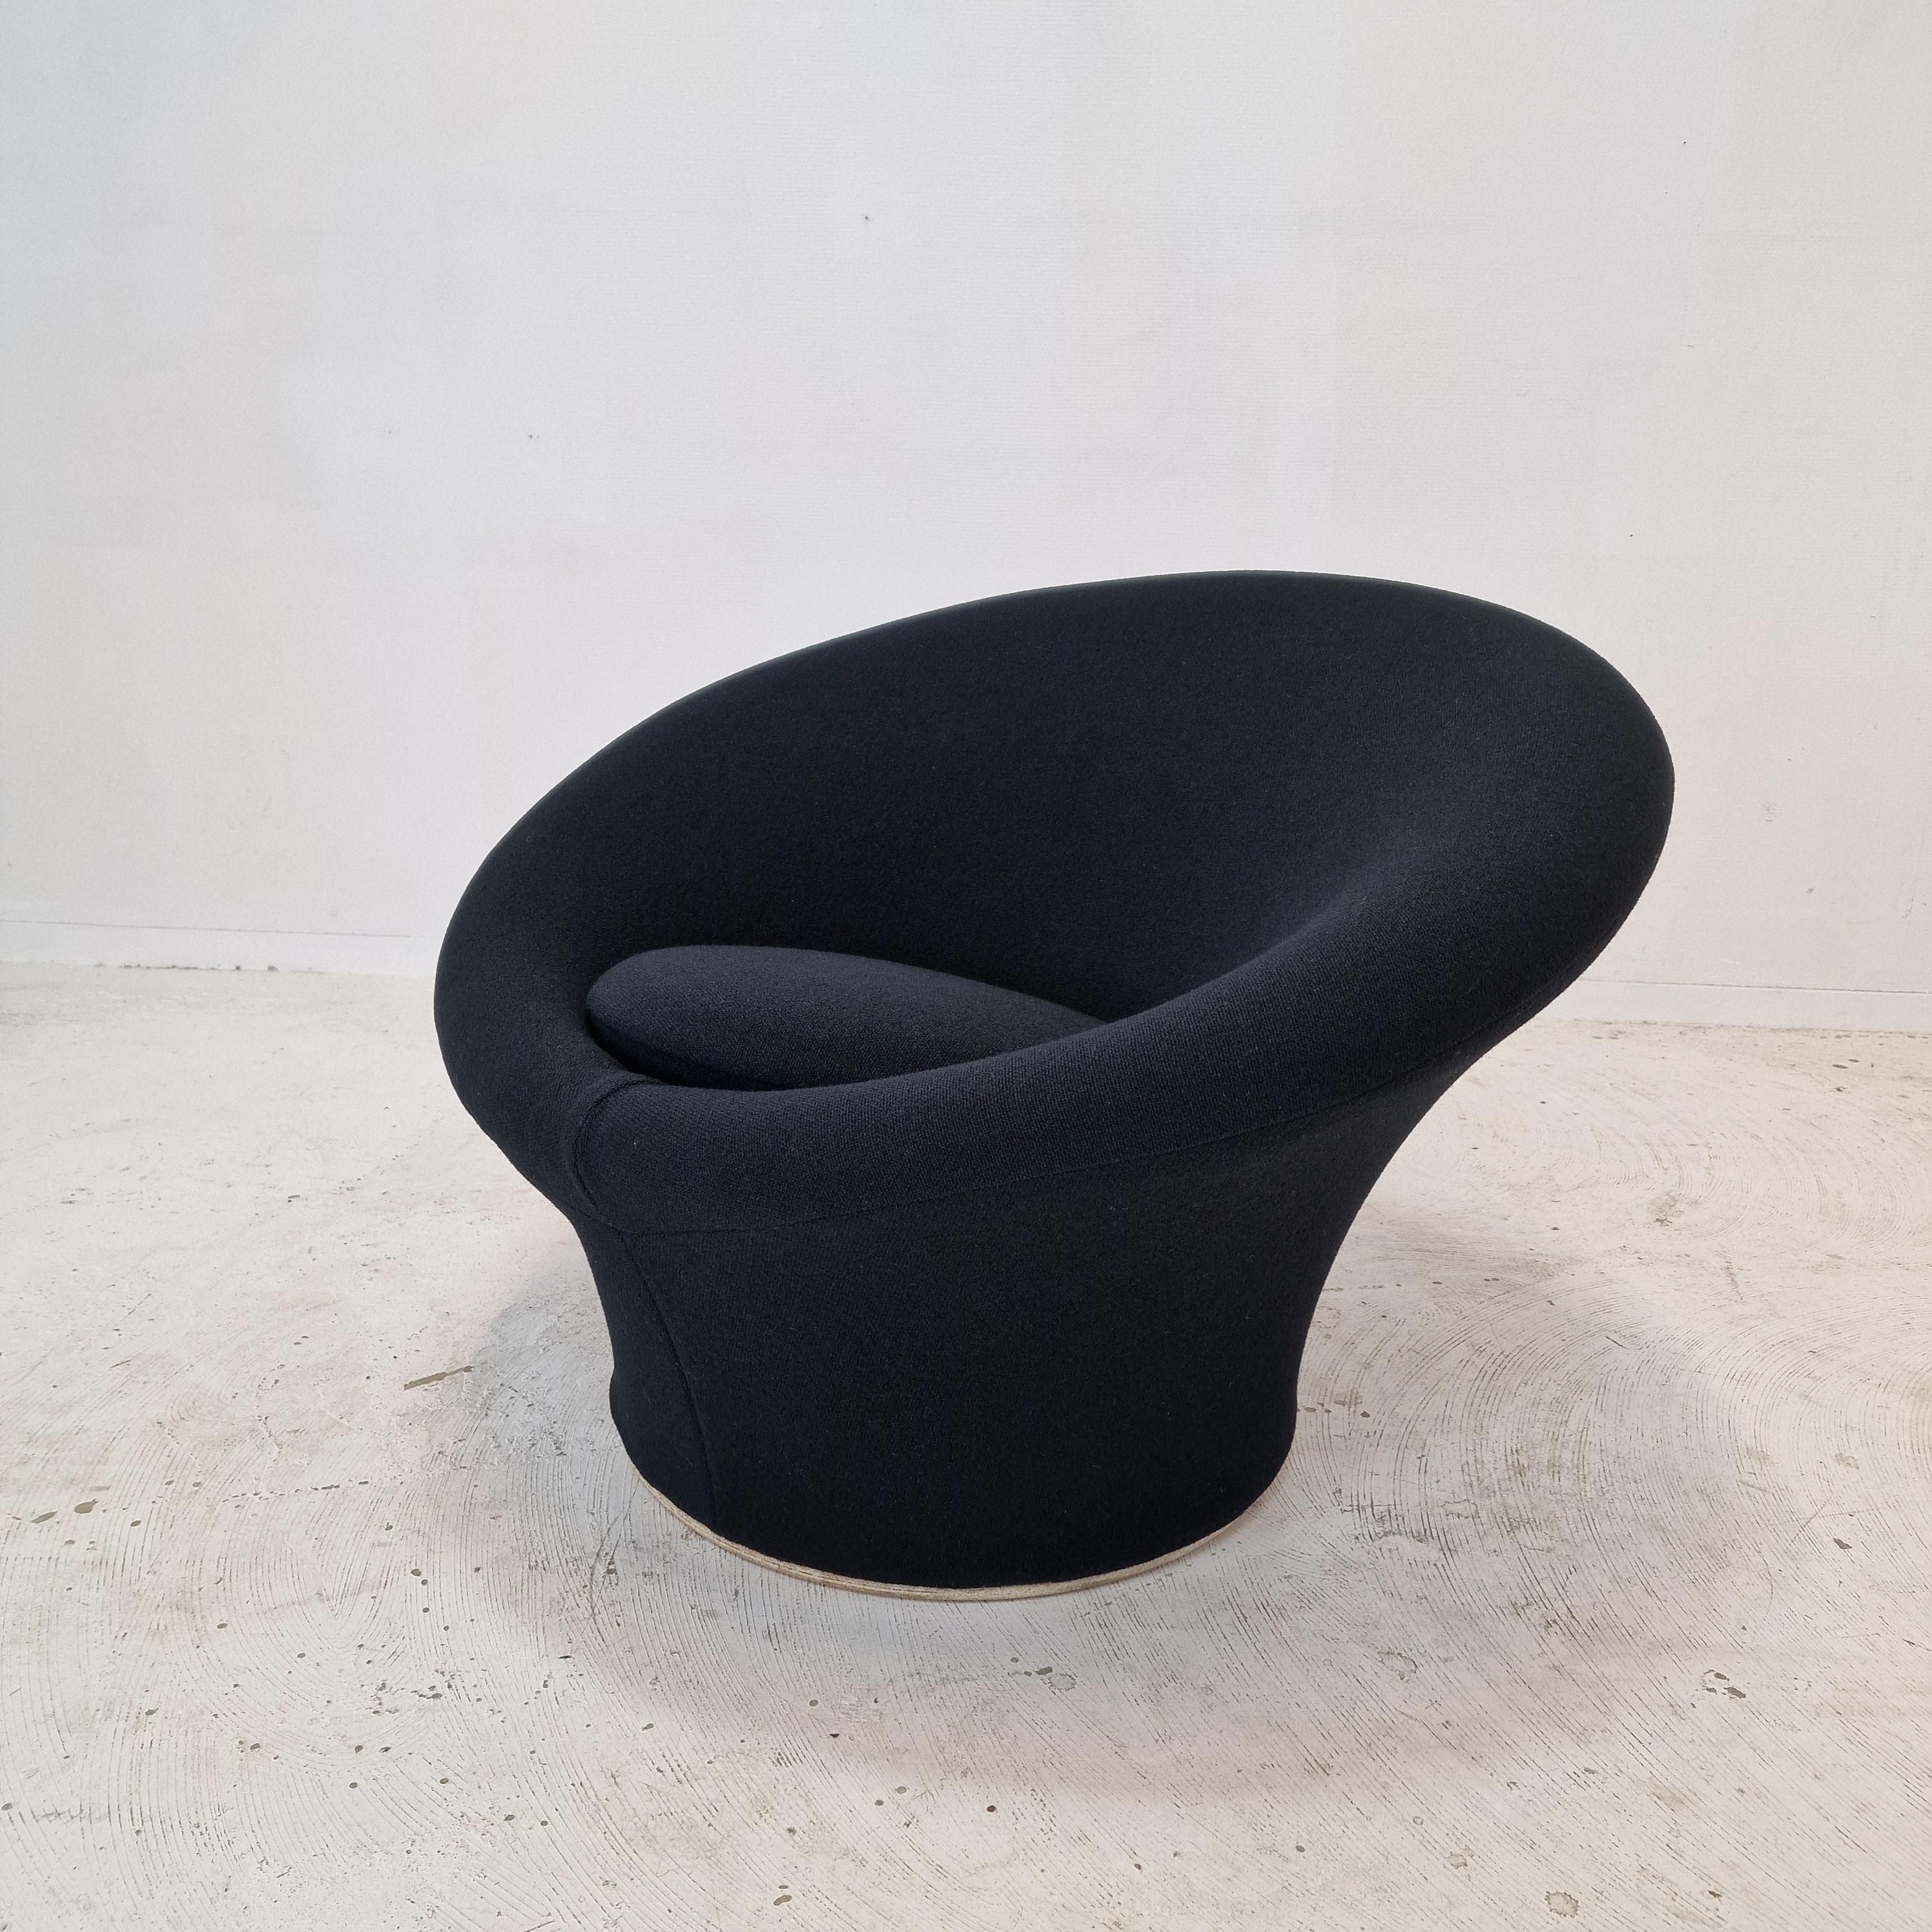 Very comfortable Artifort Mushroom chair, designed by Pierre Paulin in the 60's. 
This original Mushroom Chair is made in the 70's.

It is covered with the original Kvadrat Tonus wool fabric, color black.
This high quality fabric is still in very